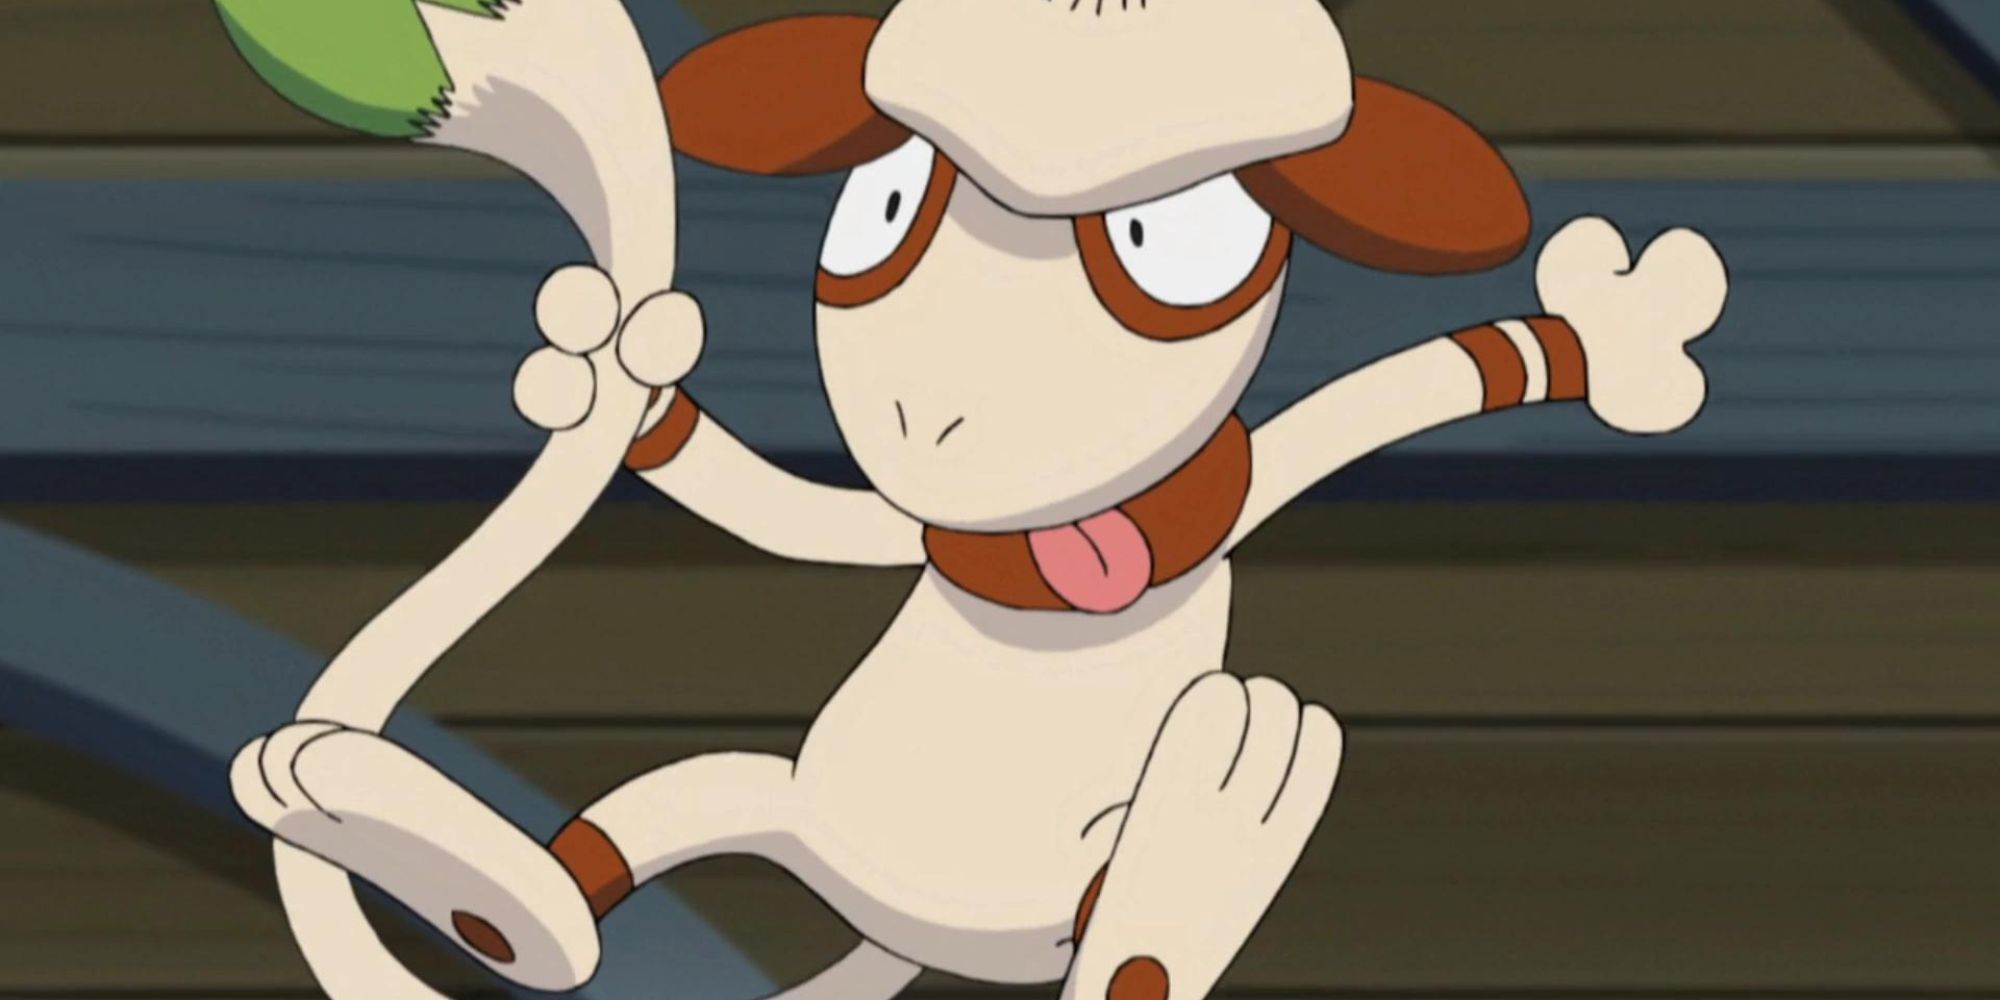 Smeargle jumps in the air while holding its tail